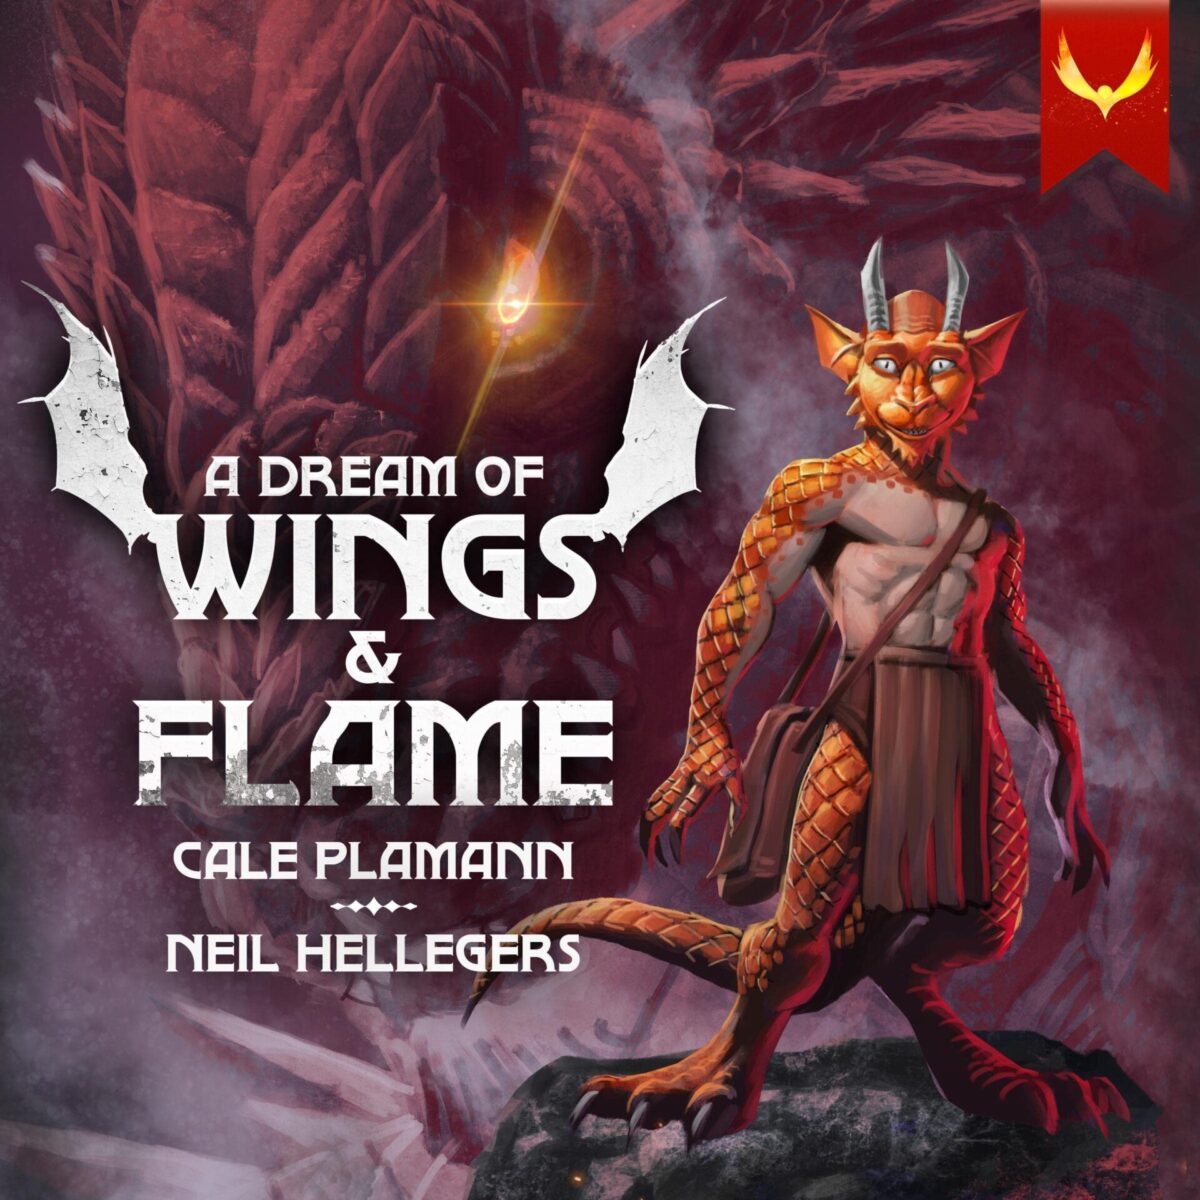 [1] A Dream Of Wings & Flame꞉ A Litrpg Adventure